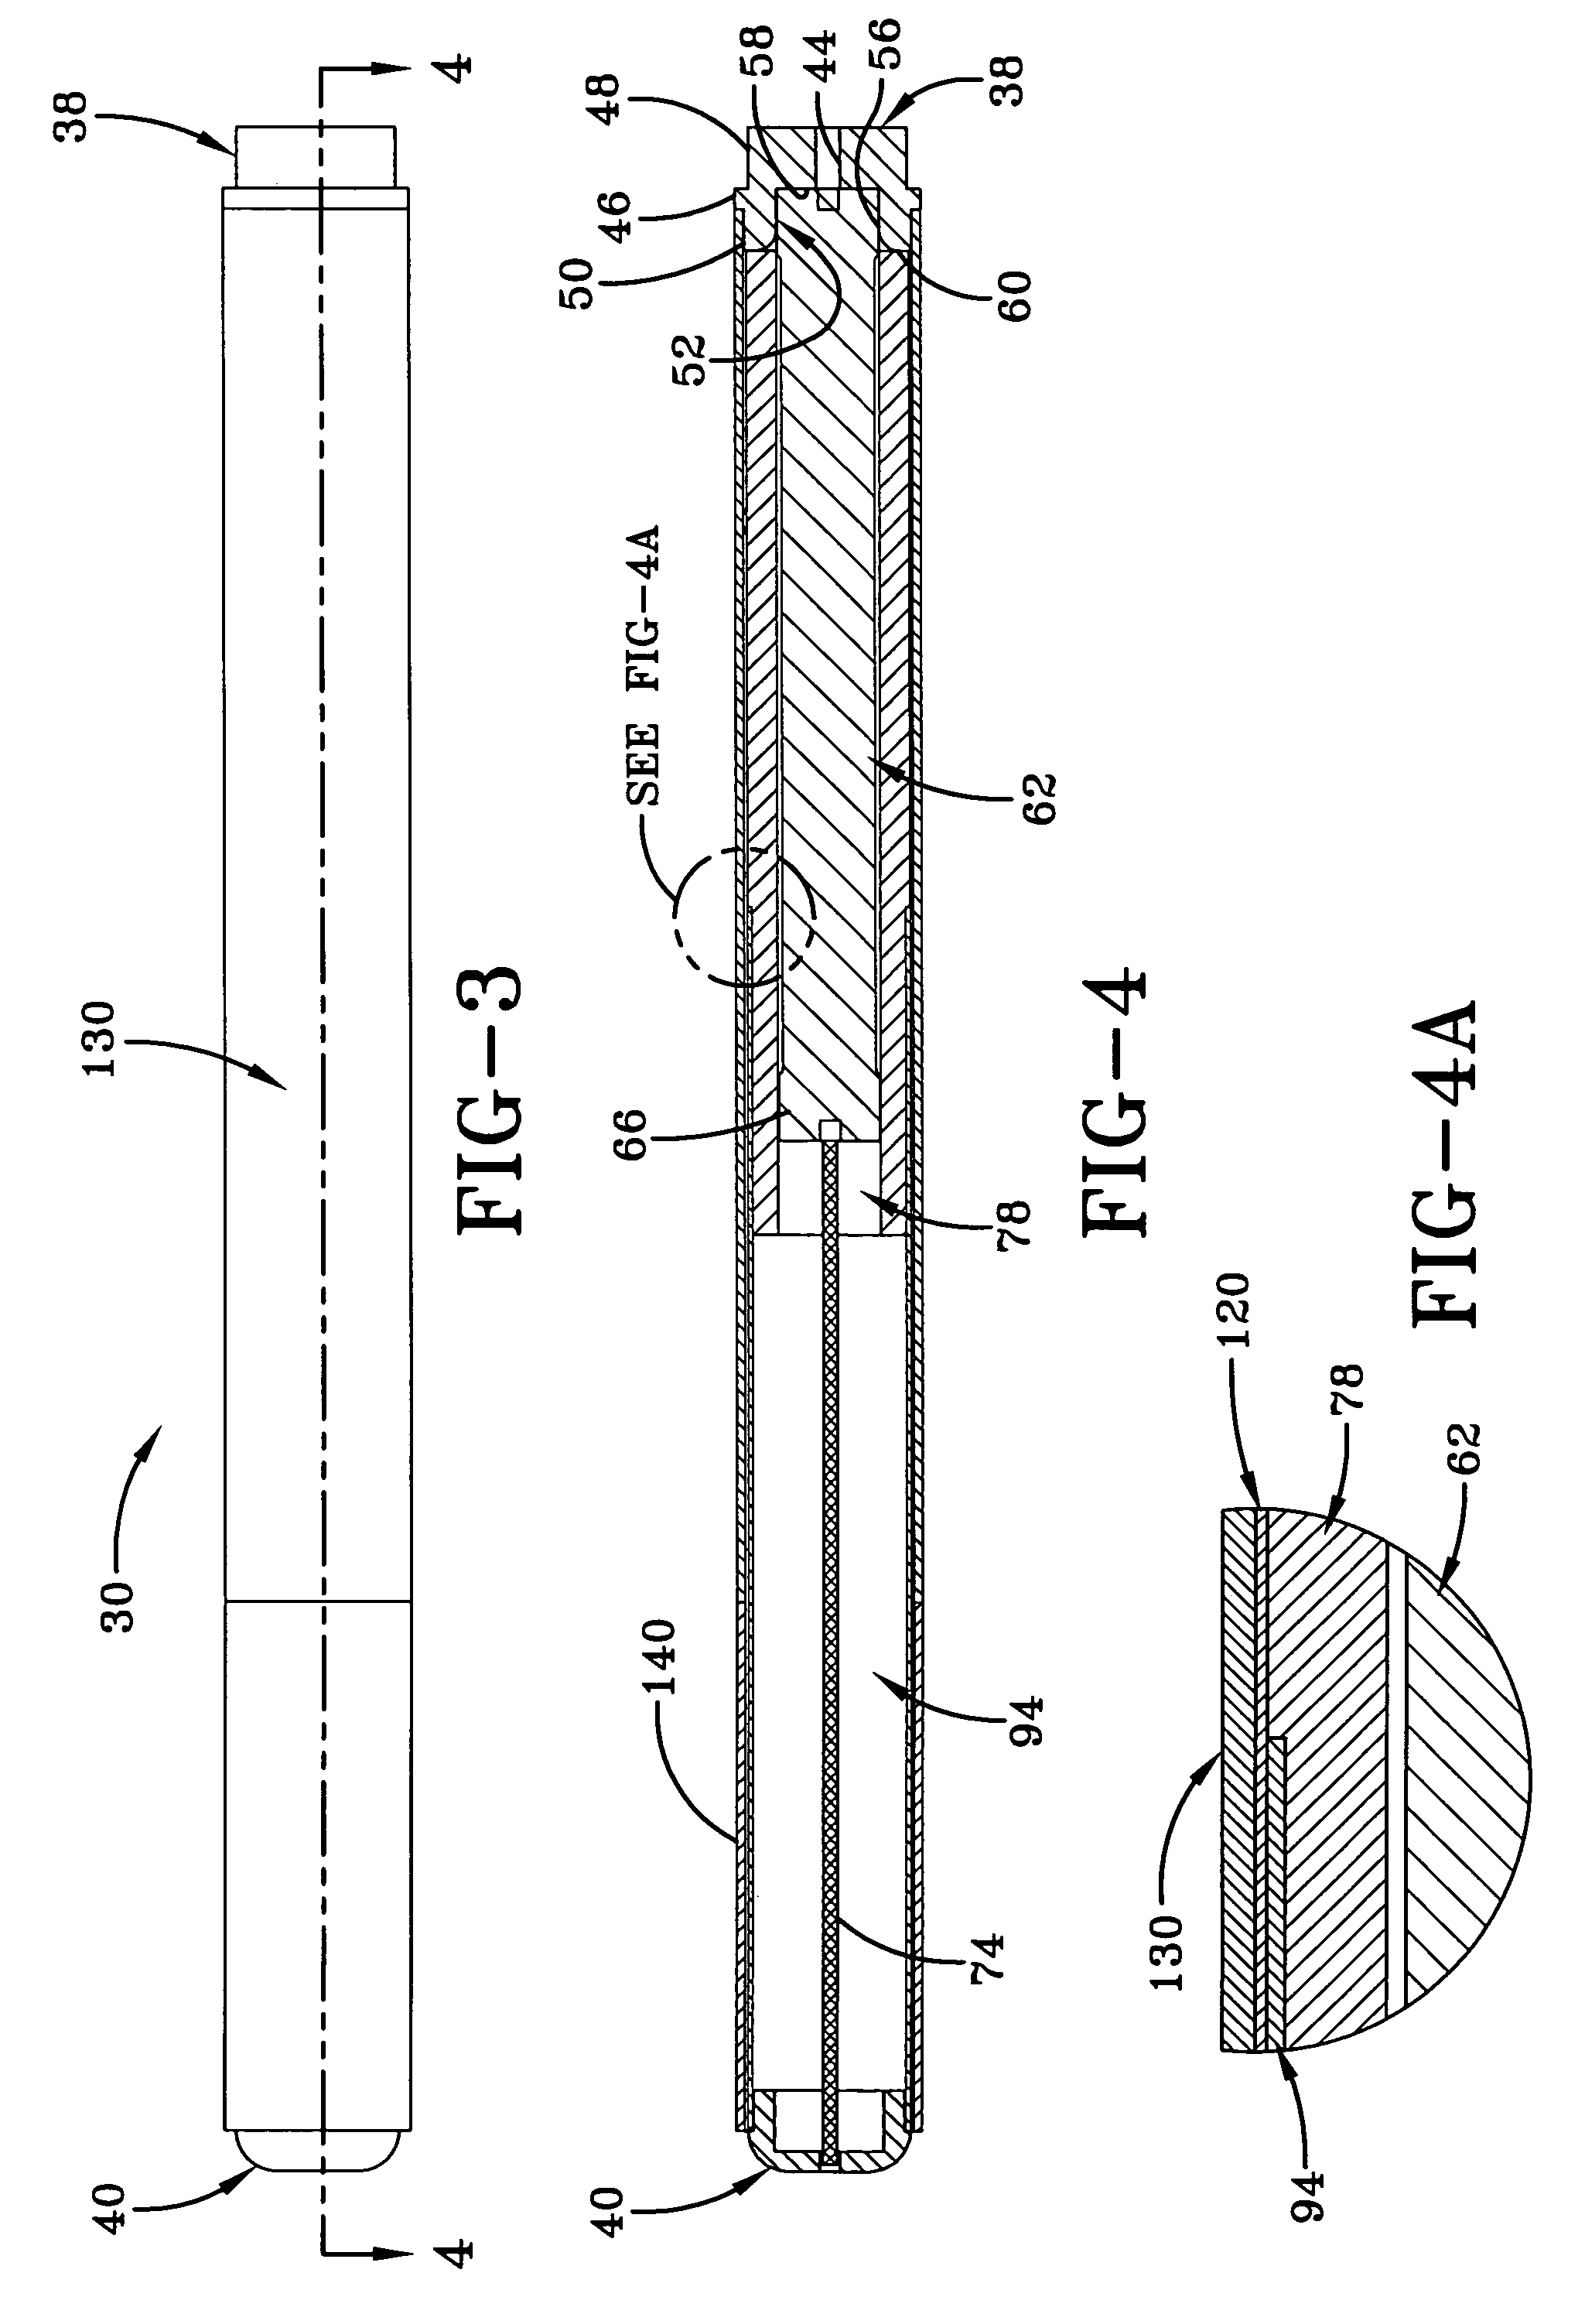 Whip antenna high voltage protection device with an integrated electric charge bleed-off system